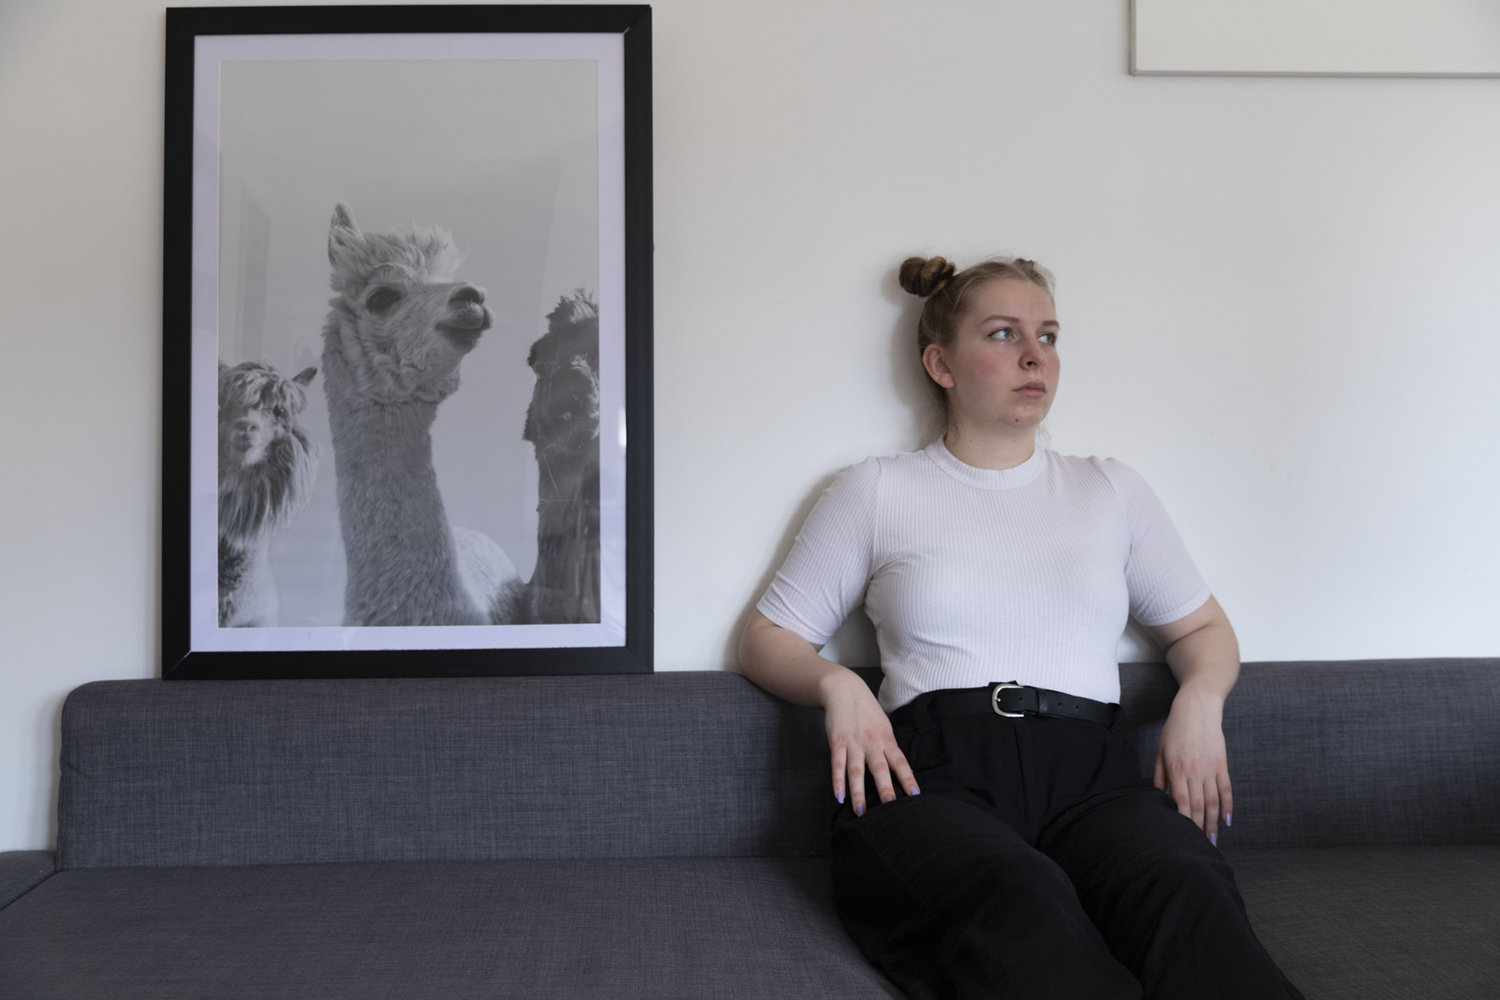 Colour photograph of female with space buns sitting next to framed image of llama, facing same direction.